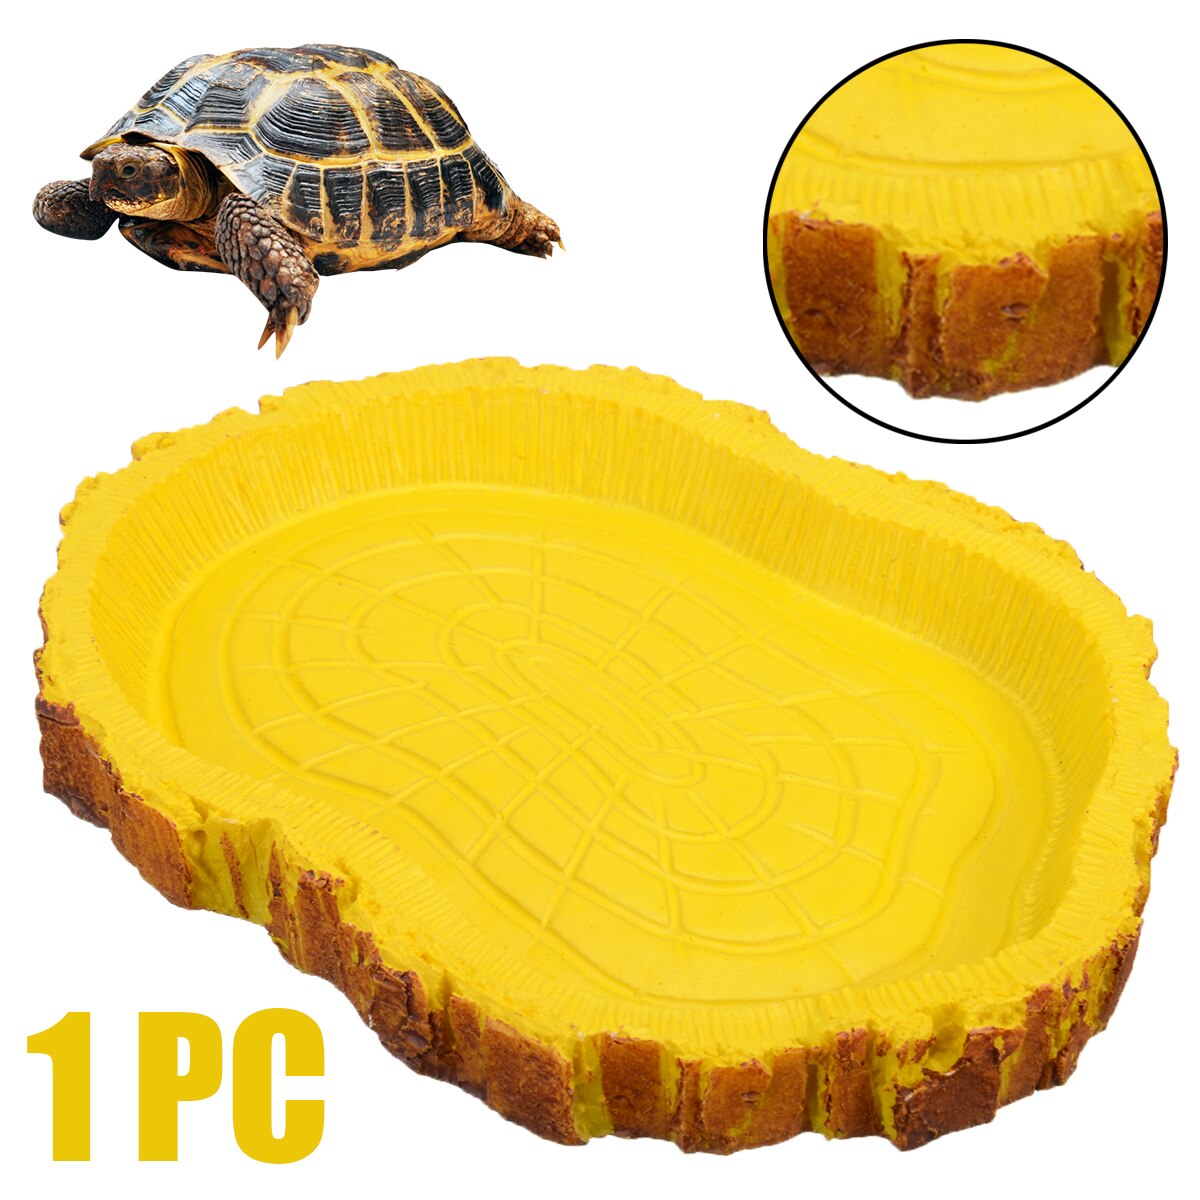 1pc 11.5*8.5*1.2CM Resin Tortoise Bowl Basin Reptiles Feeding Supplies Food Water Drinking Container Feeder Dish